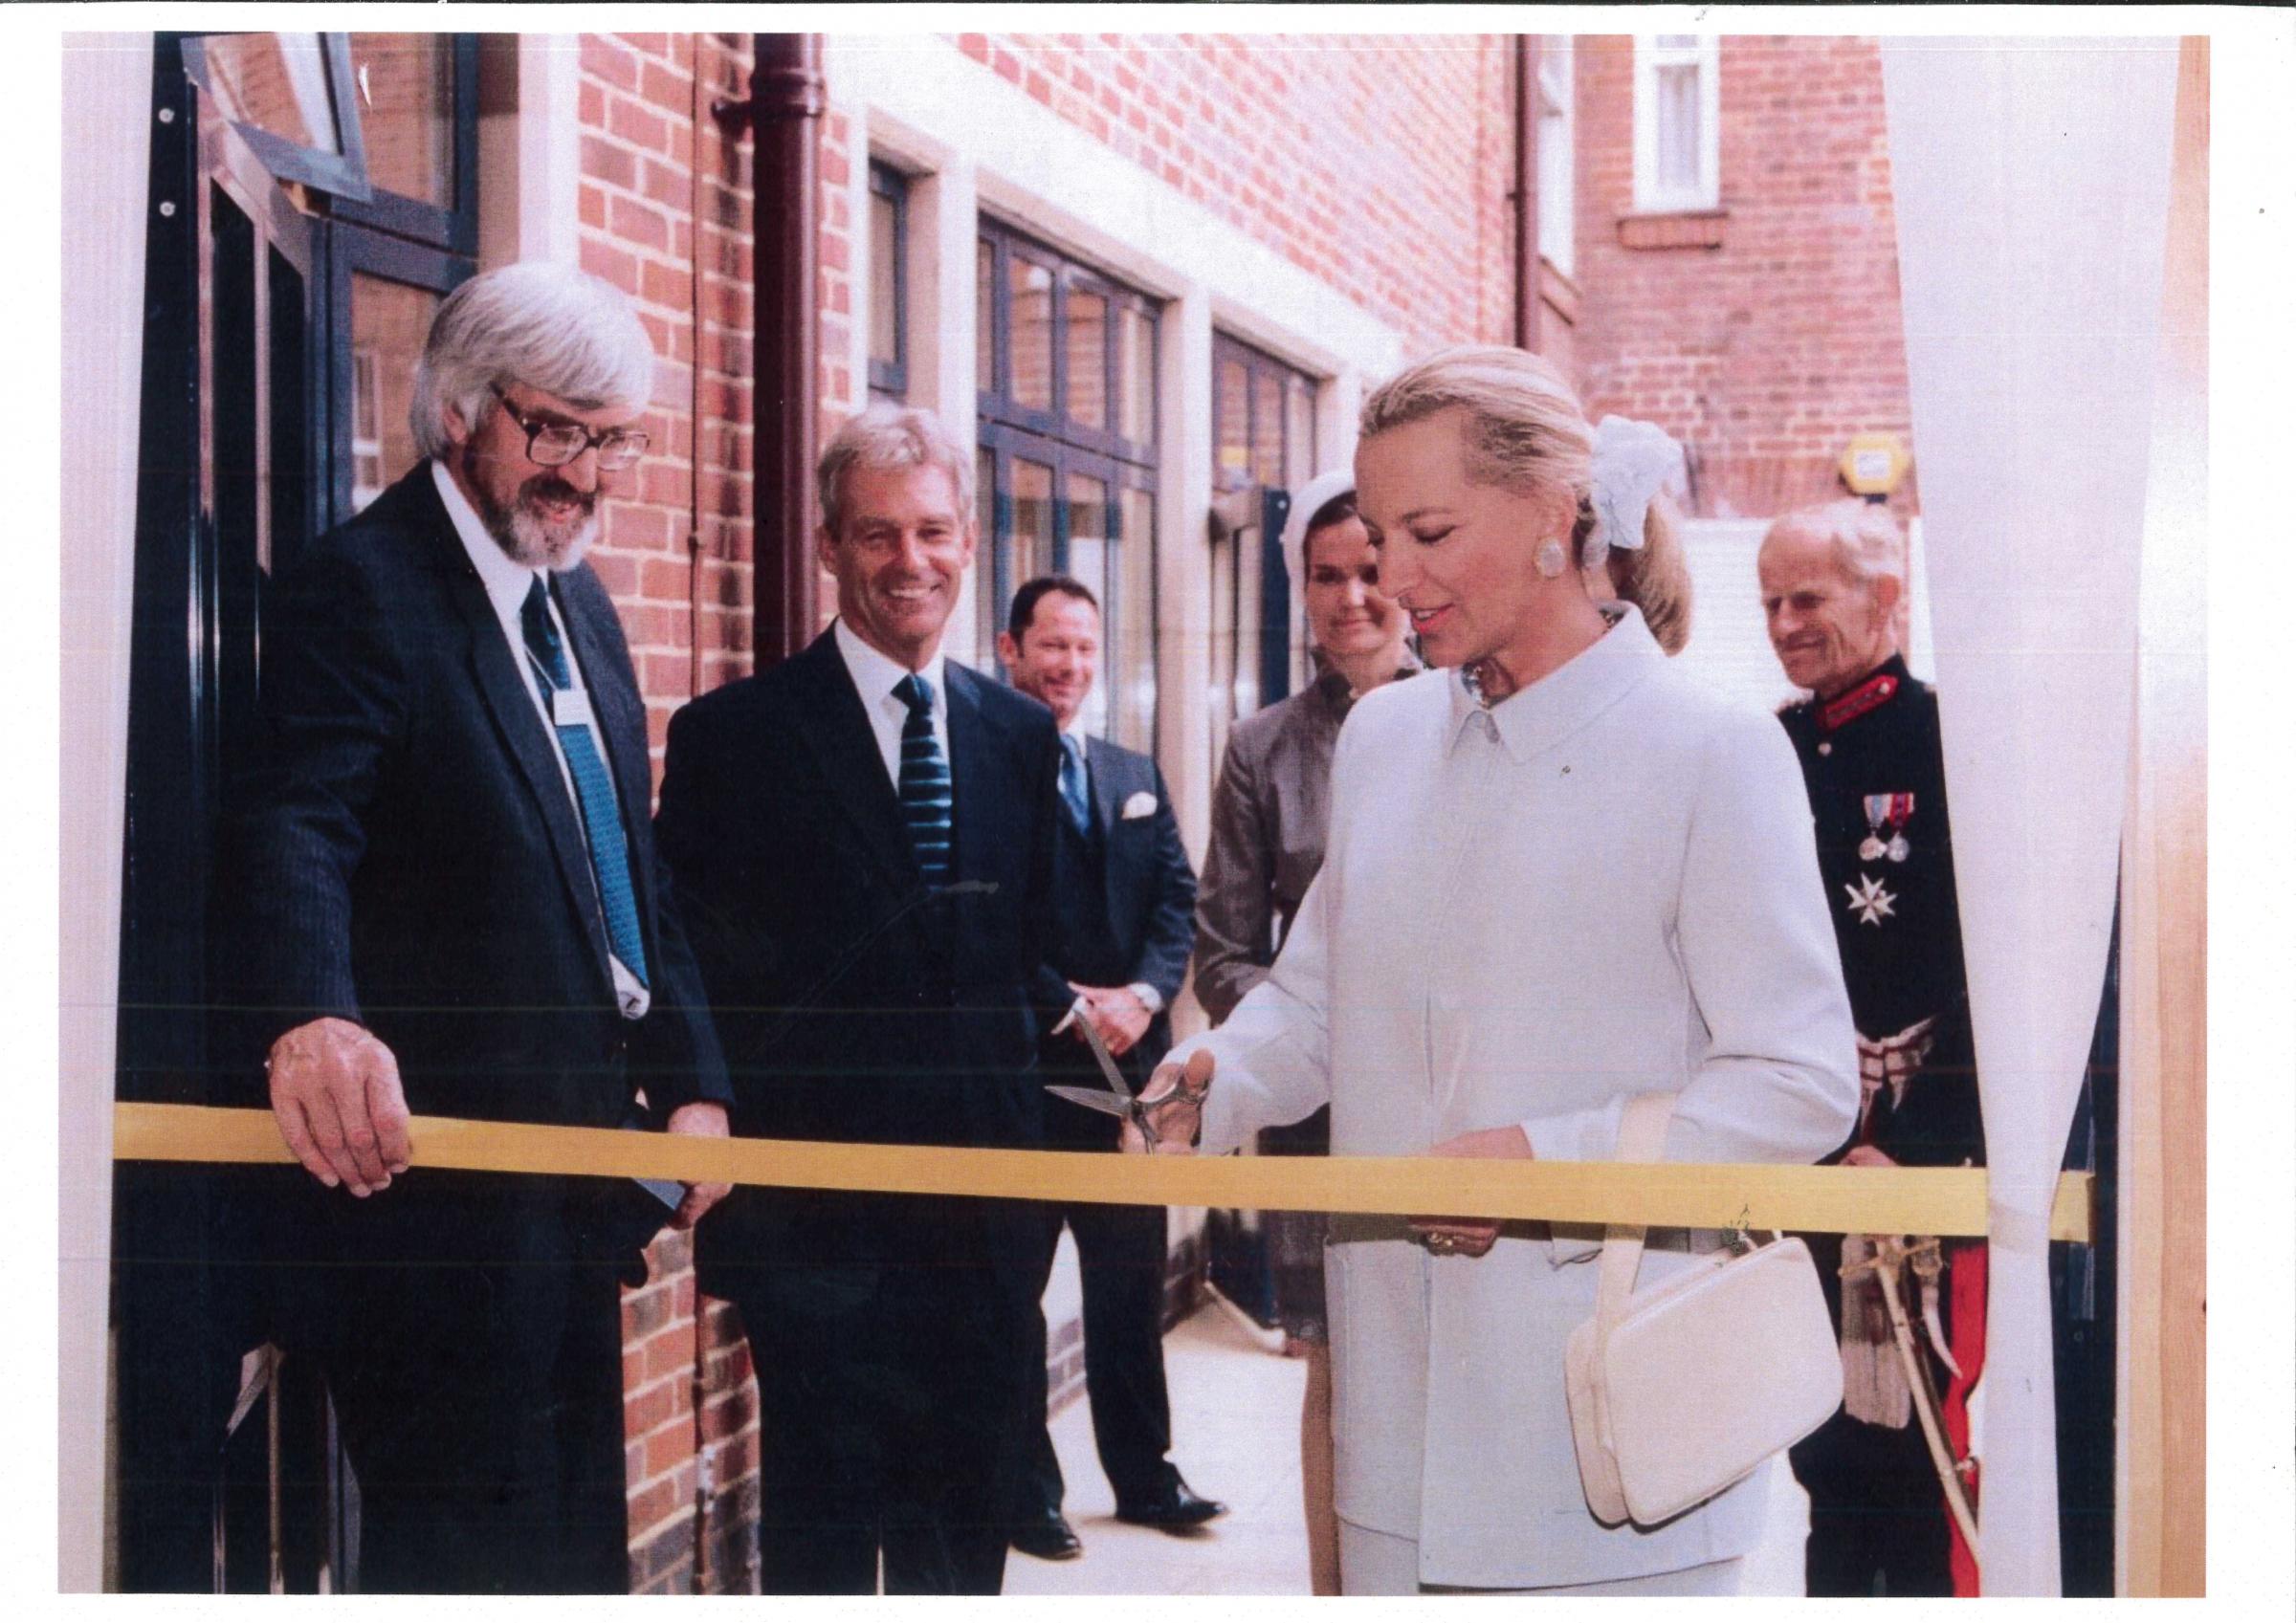 Princess Michael opens the new Inpatient Unit in 2000 with Lottery Manager Terence Smith, then Chief Executive Graham Ball, Lady Fellowes and the then Lord Lieutenant of Hertfordshire Simon Bowes-Lyon